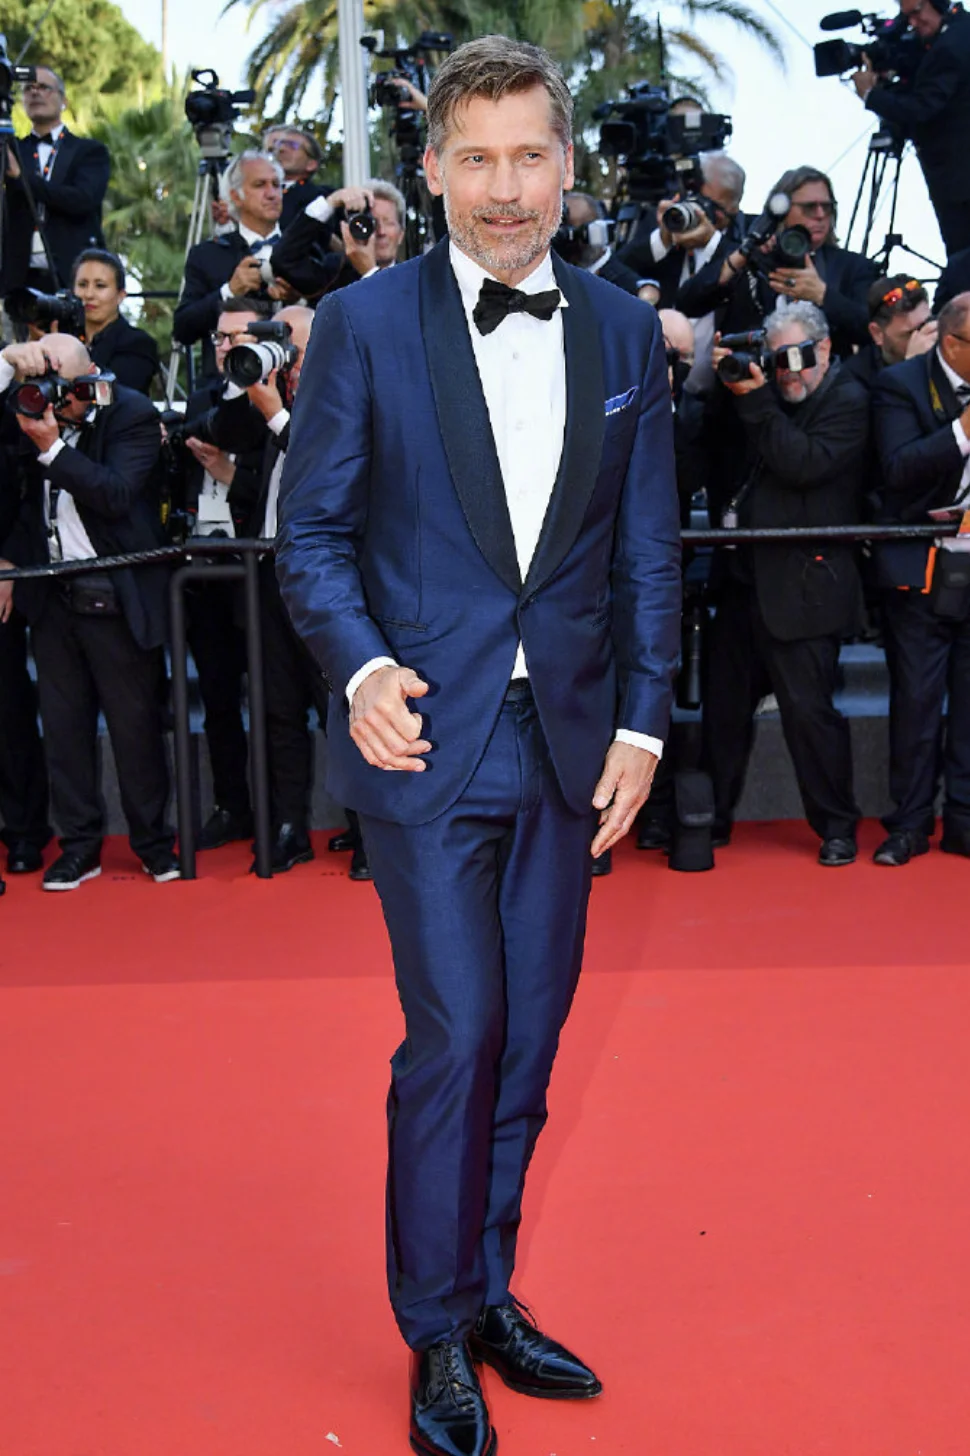 Nikolaj Coster-Waldau on the red carpet at the Cannes Film Festival